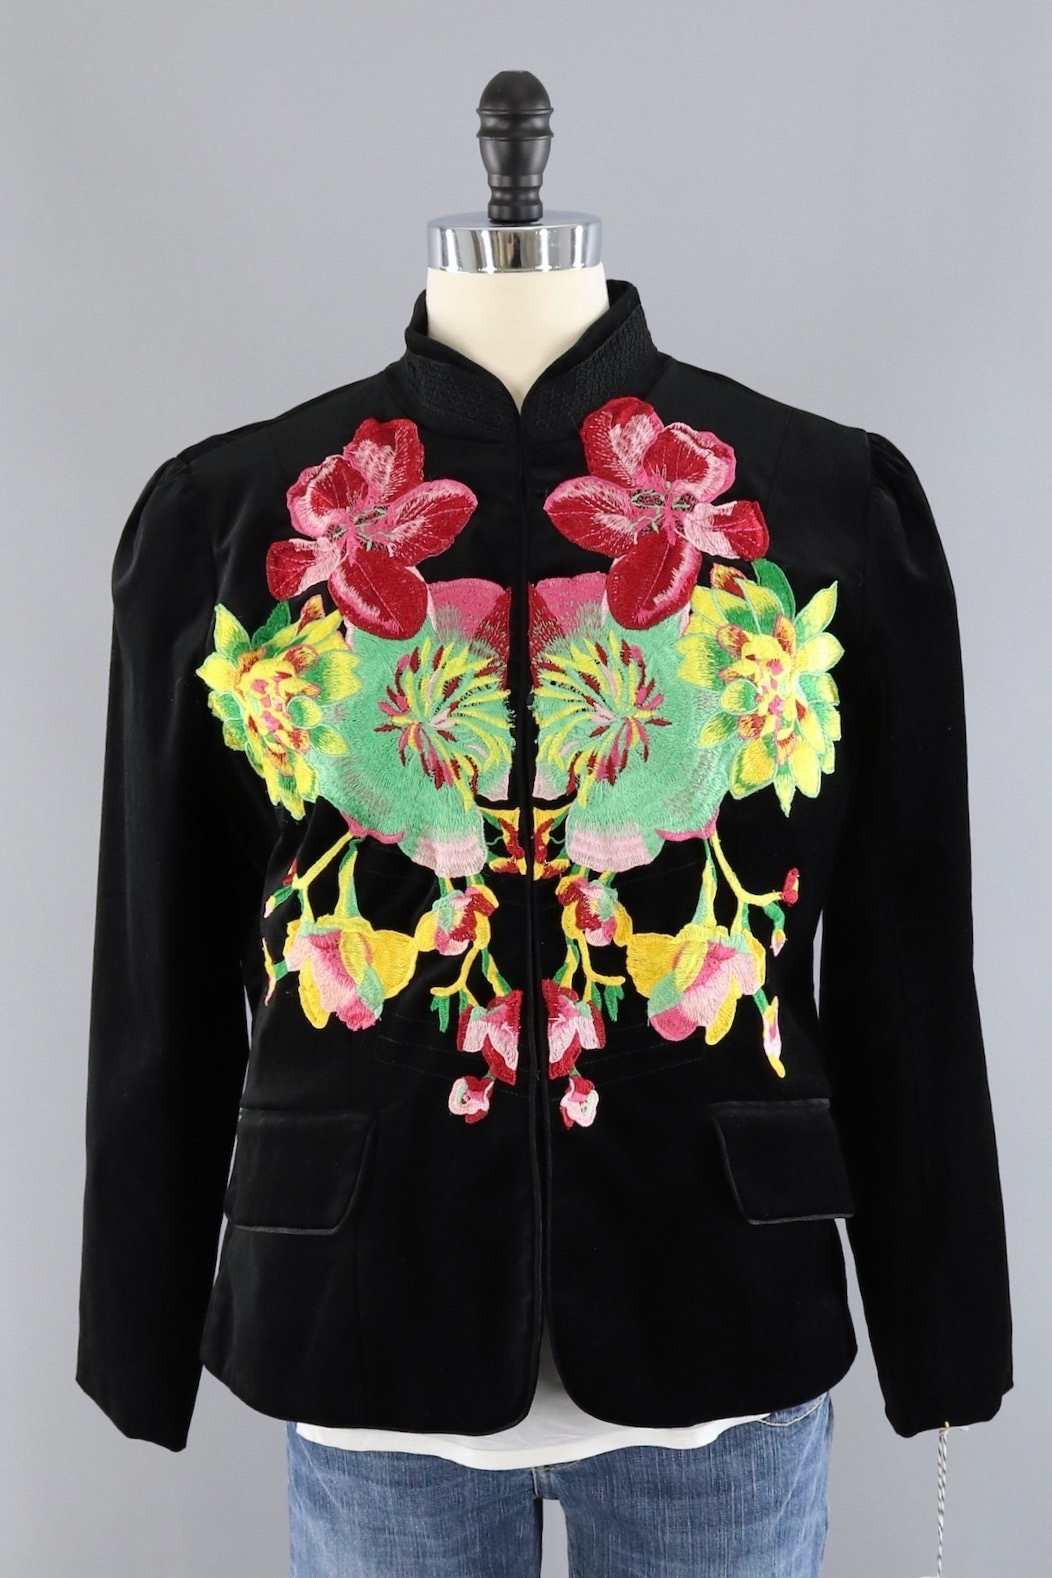 Black Velvet Military Style Jacket with Floral Embroidery - ThisBlueBird